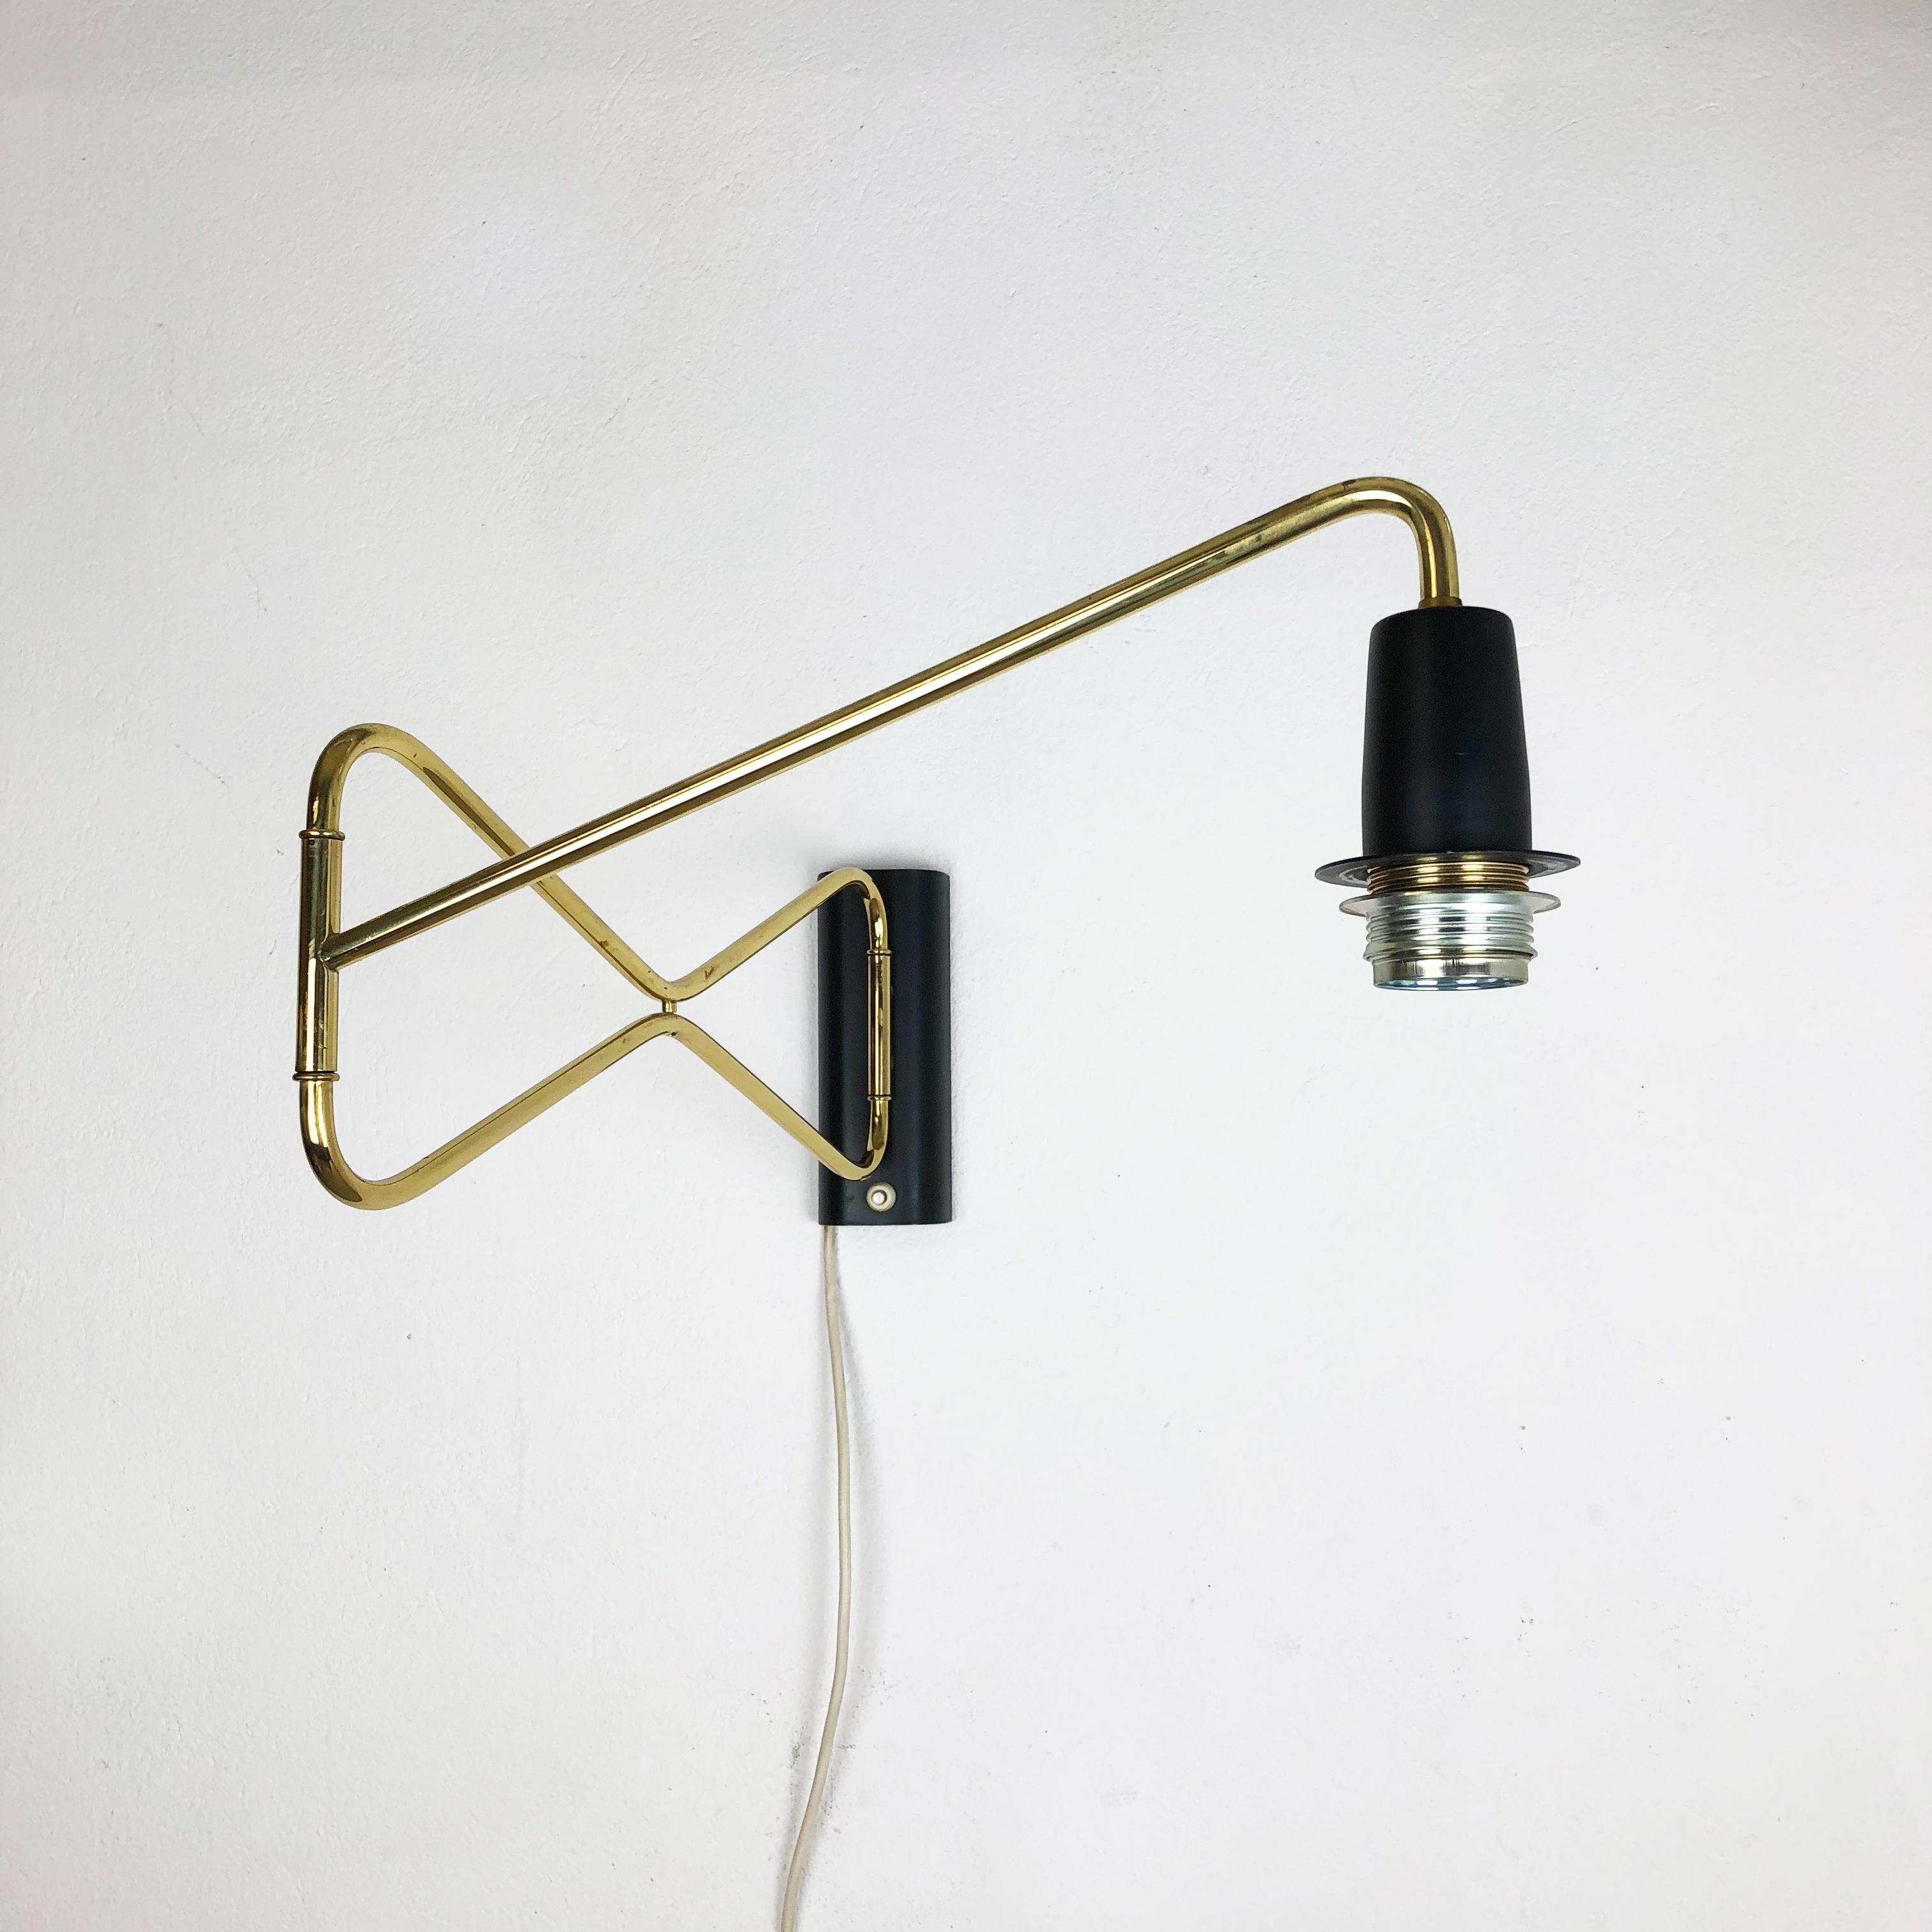 20th Century Original Modernist 1950s Brass Metal Swing Wall Light Made by Cosack, Germany